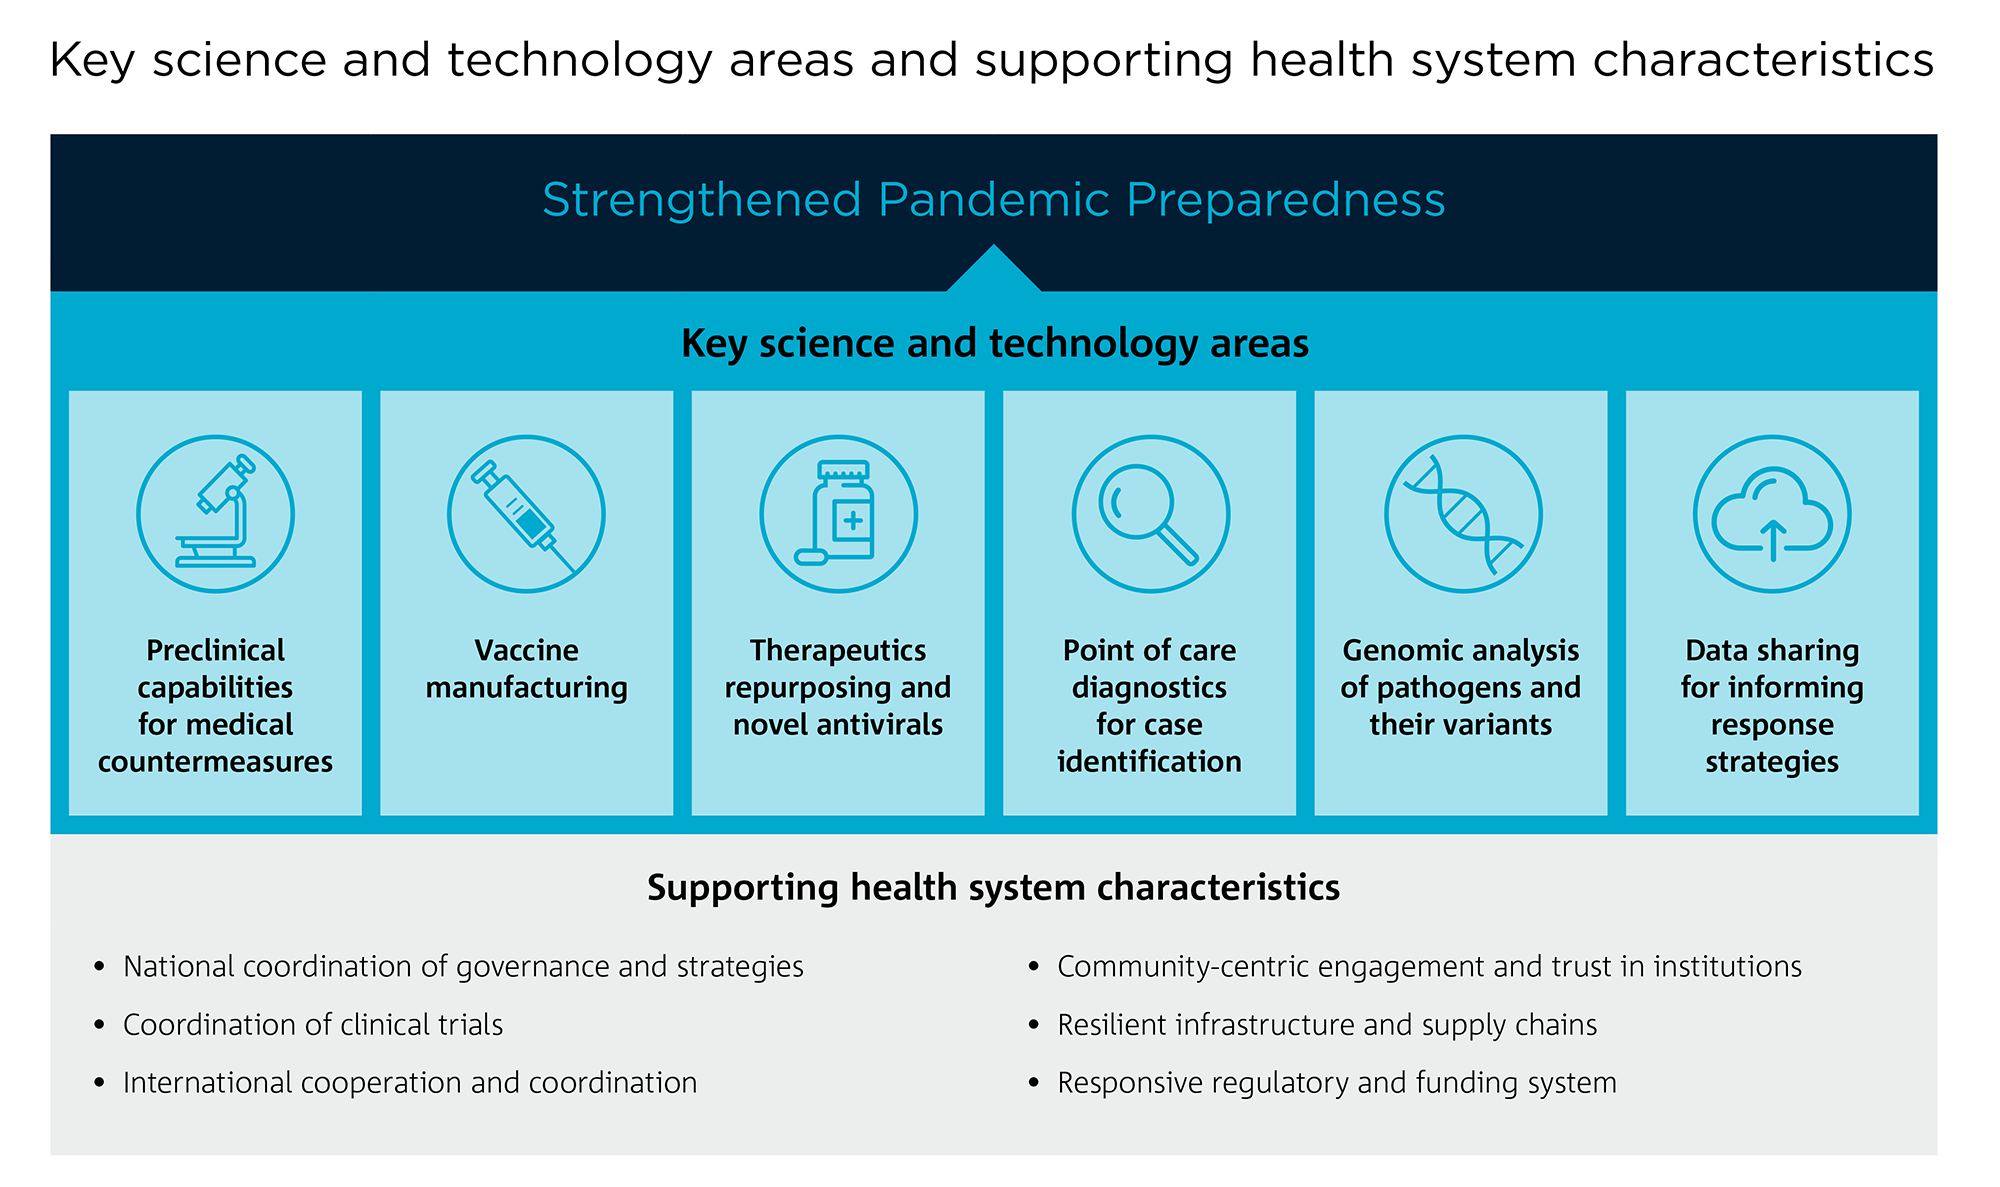 An image showing six science and technology areas and six supporting health system characteristics